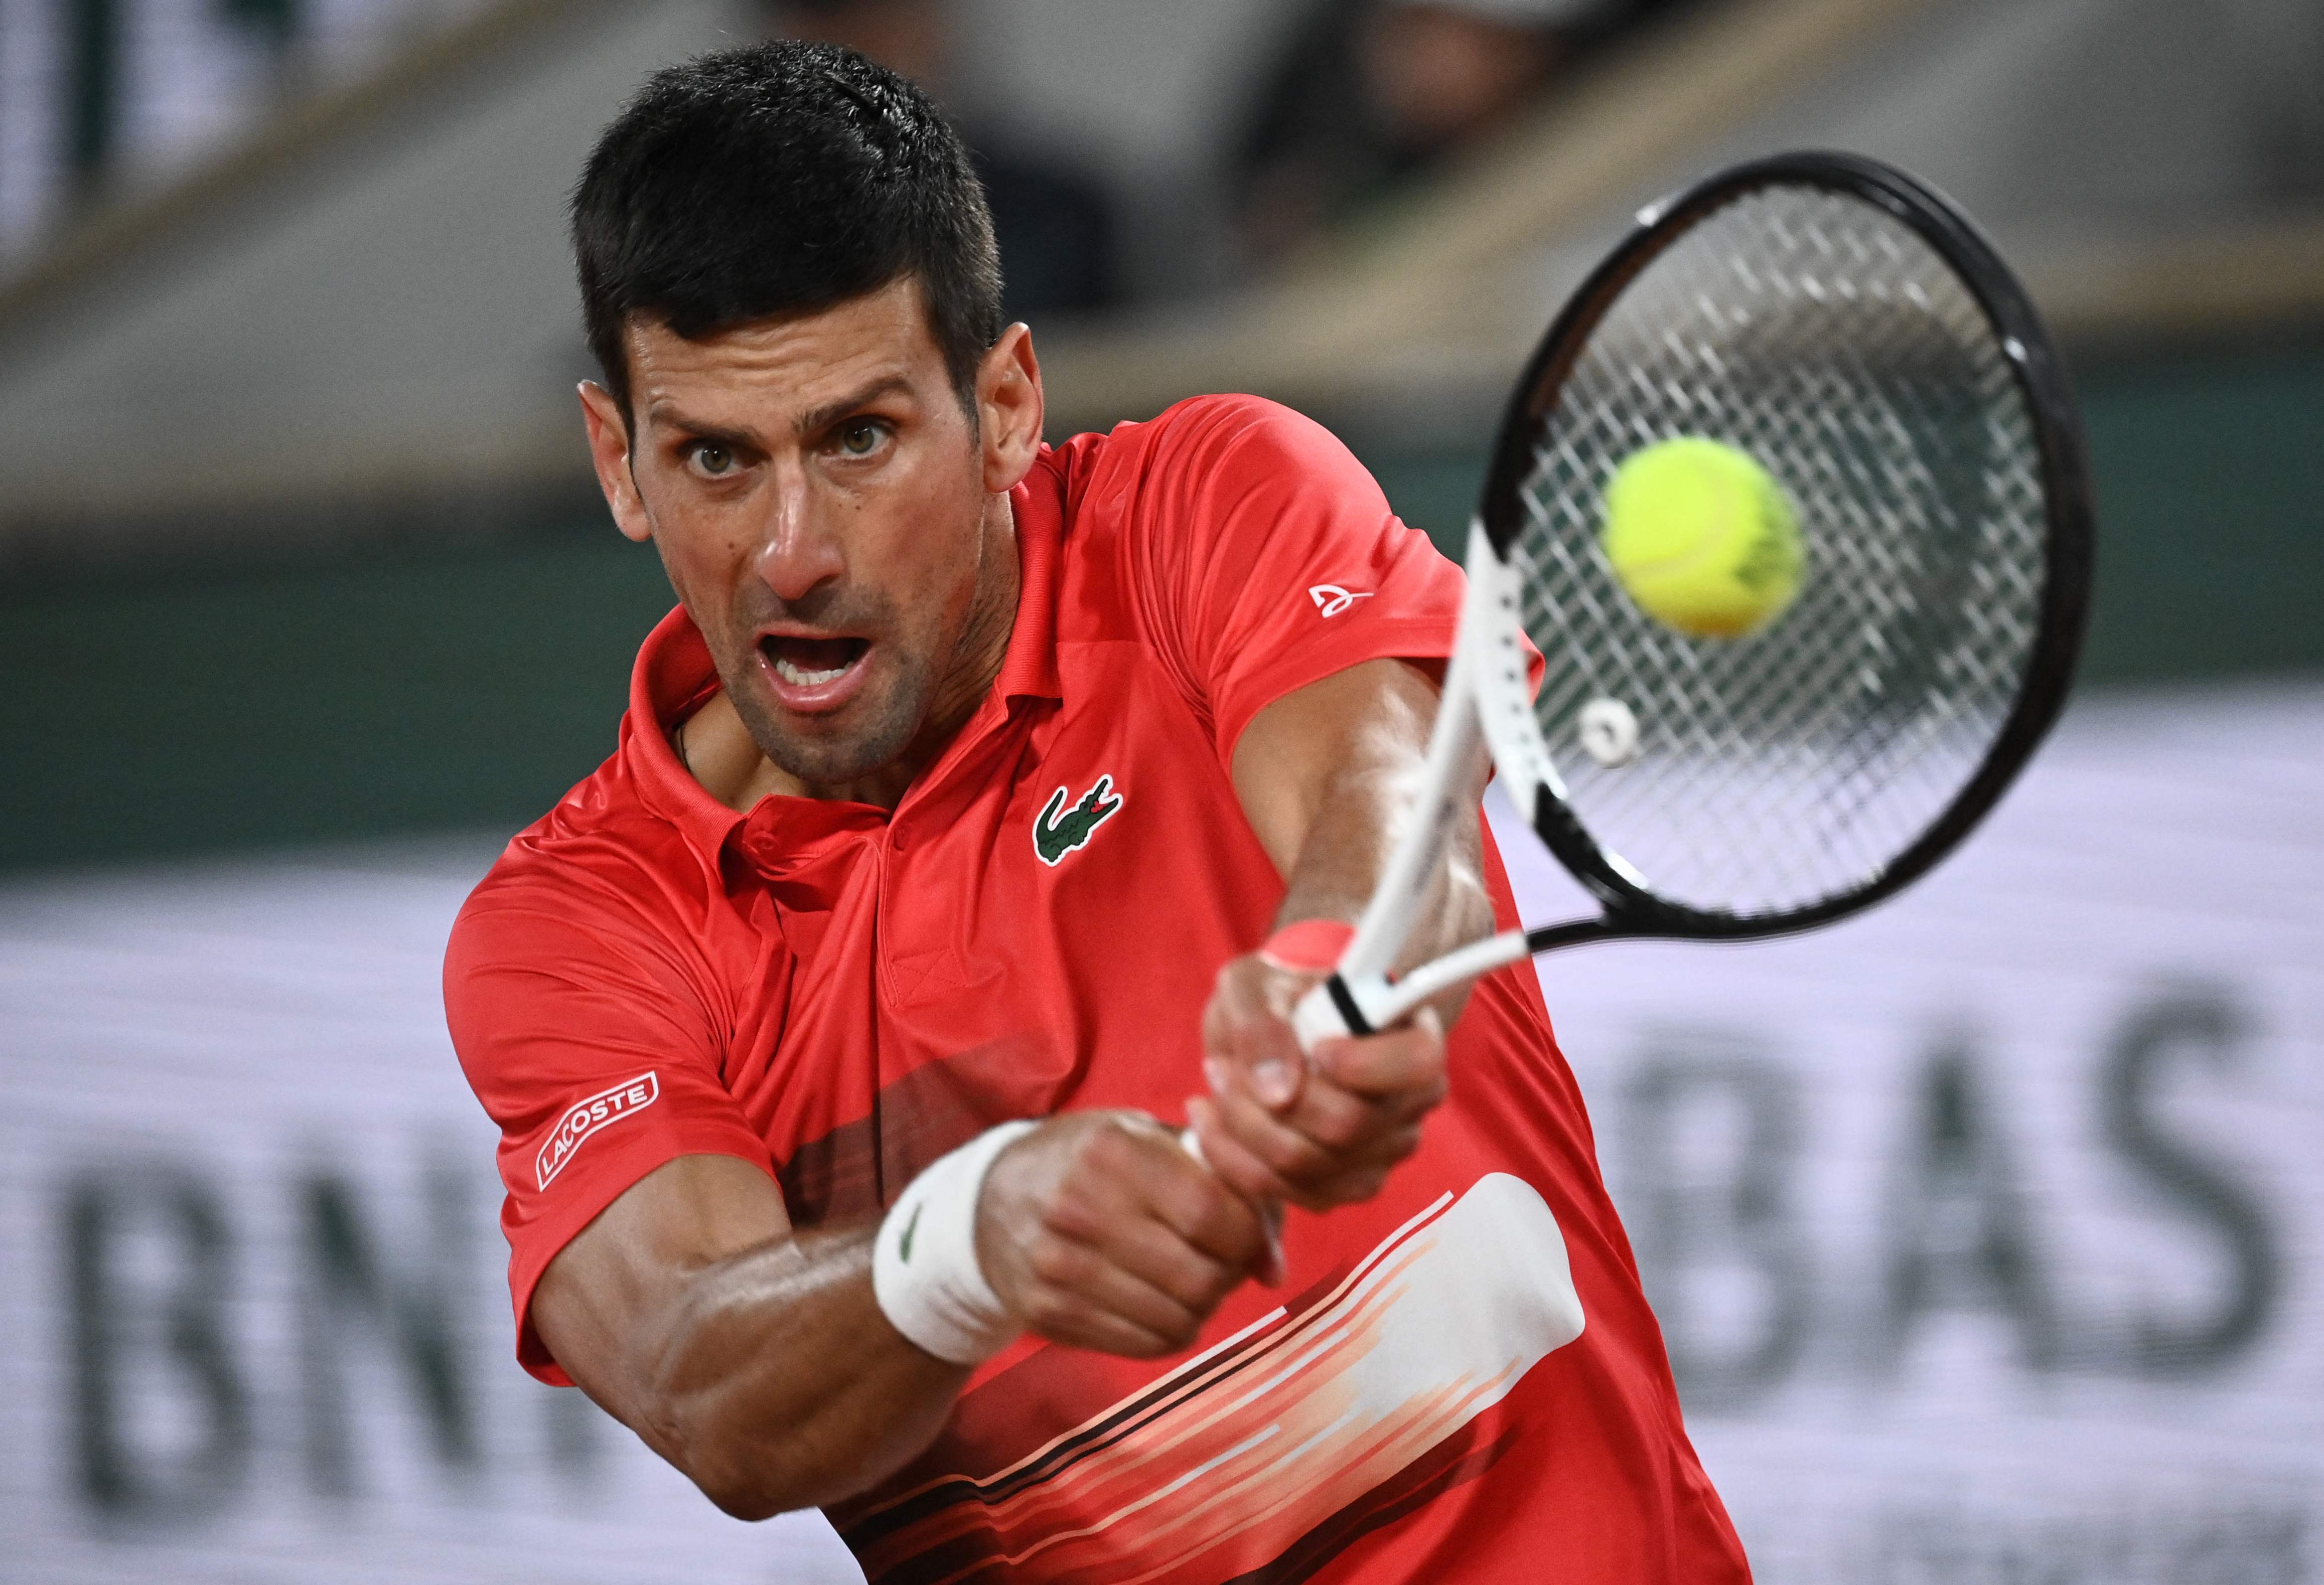 Djokovic fought back after initially being blown away by Nadal in the first set